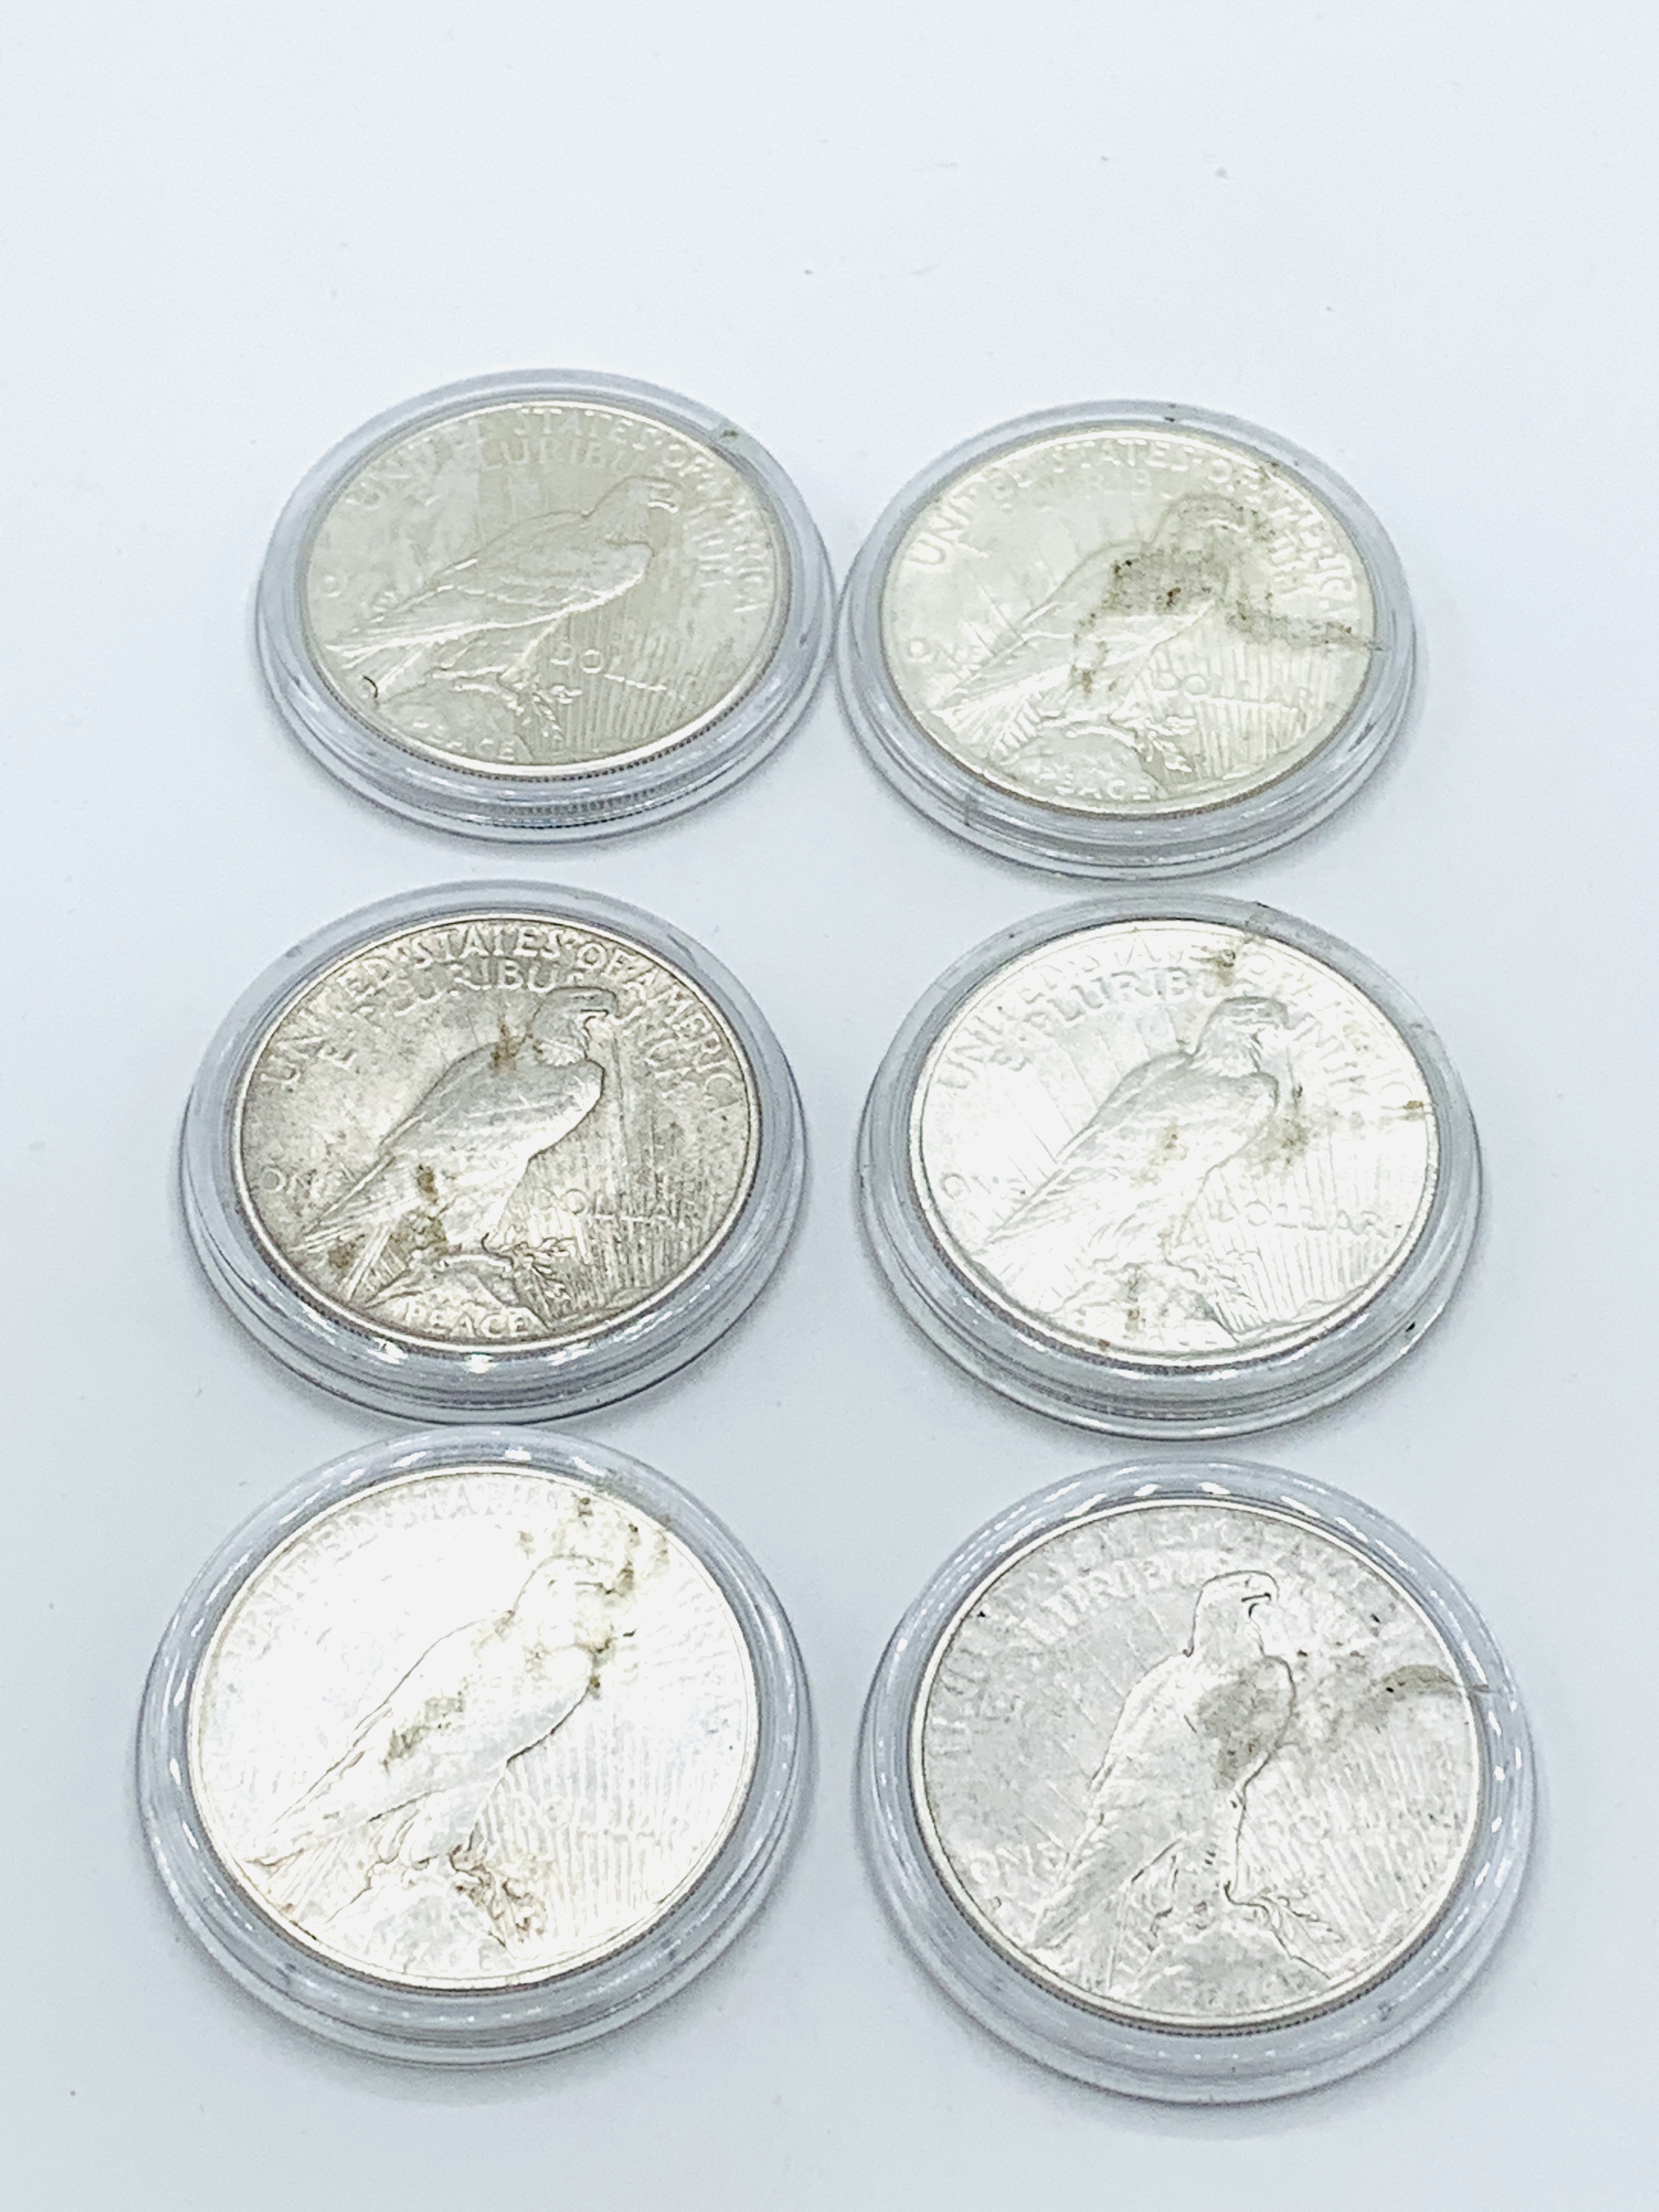 Six US Peace silver dollars - Image 2 of 2